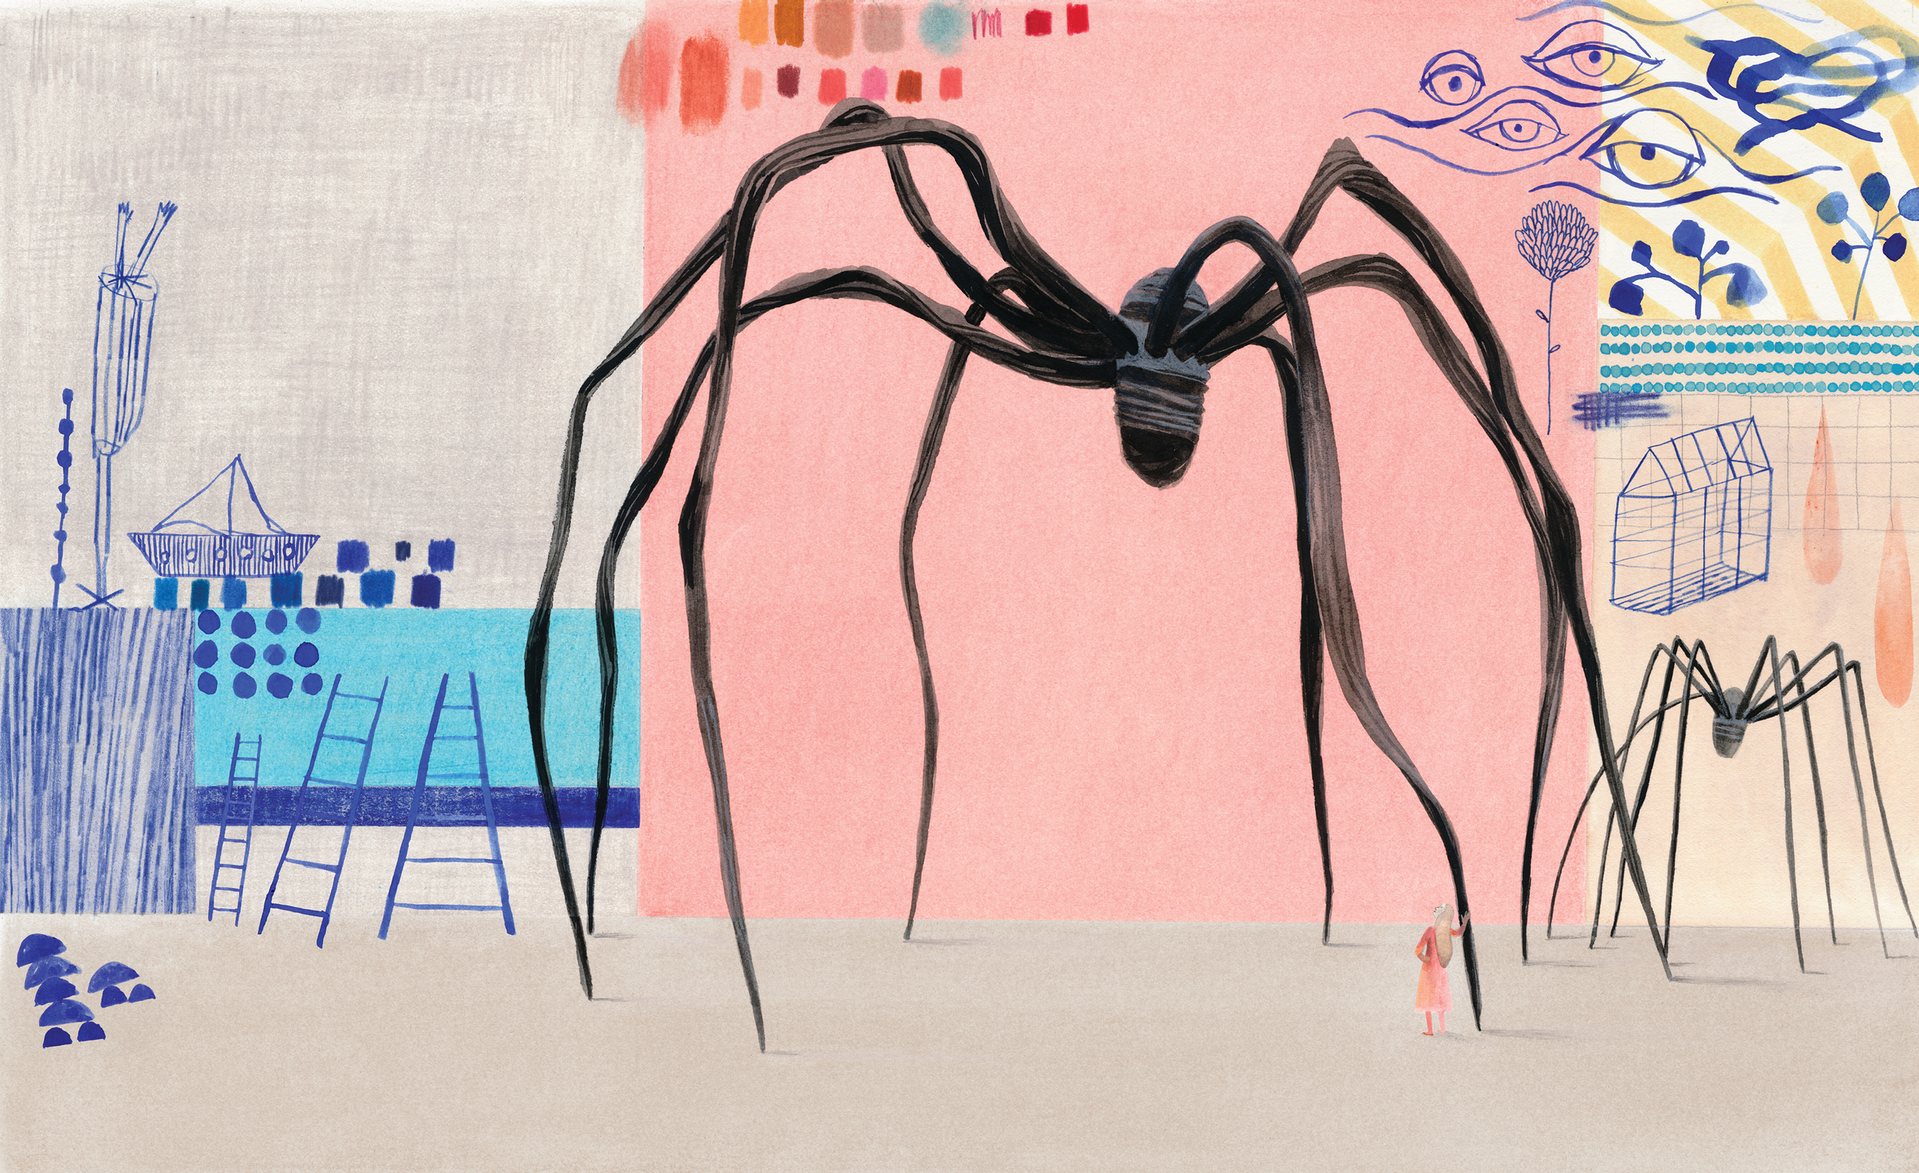 An illustration of Louise Bourgeois' Spider by Isabelle Arsenault. From the new children's book Cloth Lullaby: The Woven Life of Louise Bourgeois. Image courtesy of the Guardian.